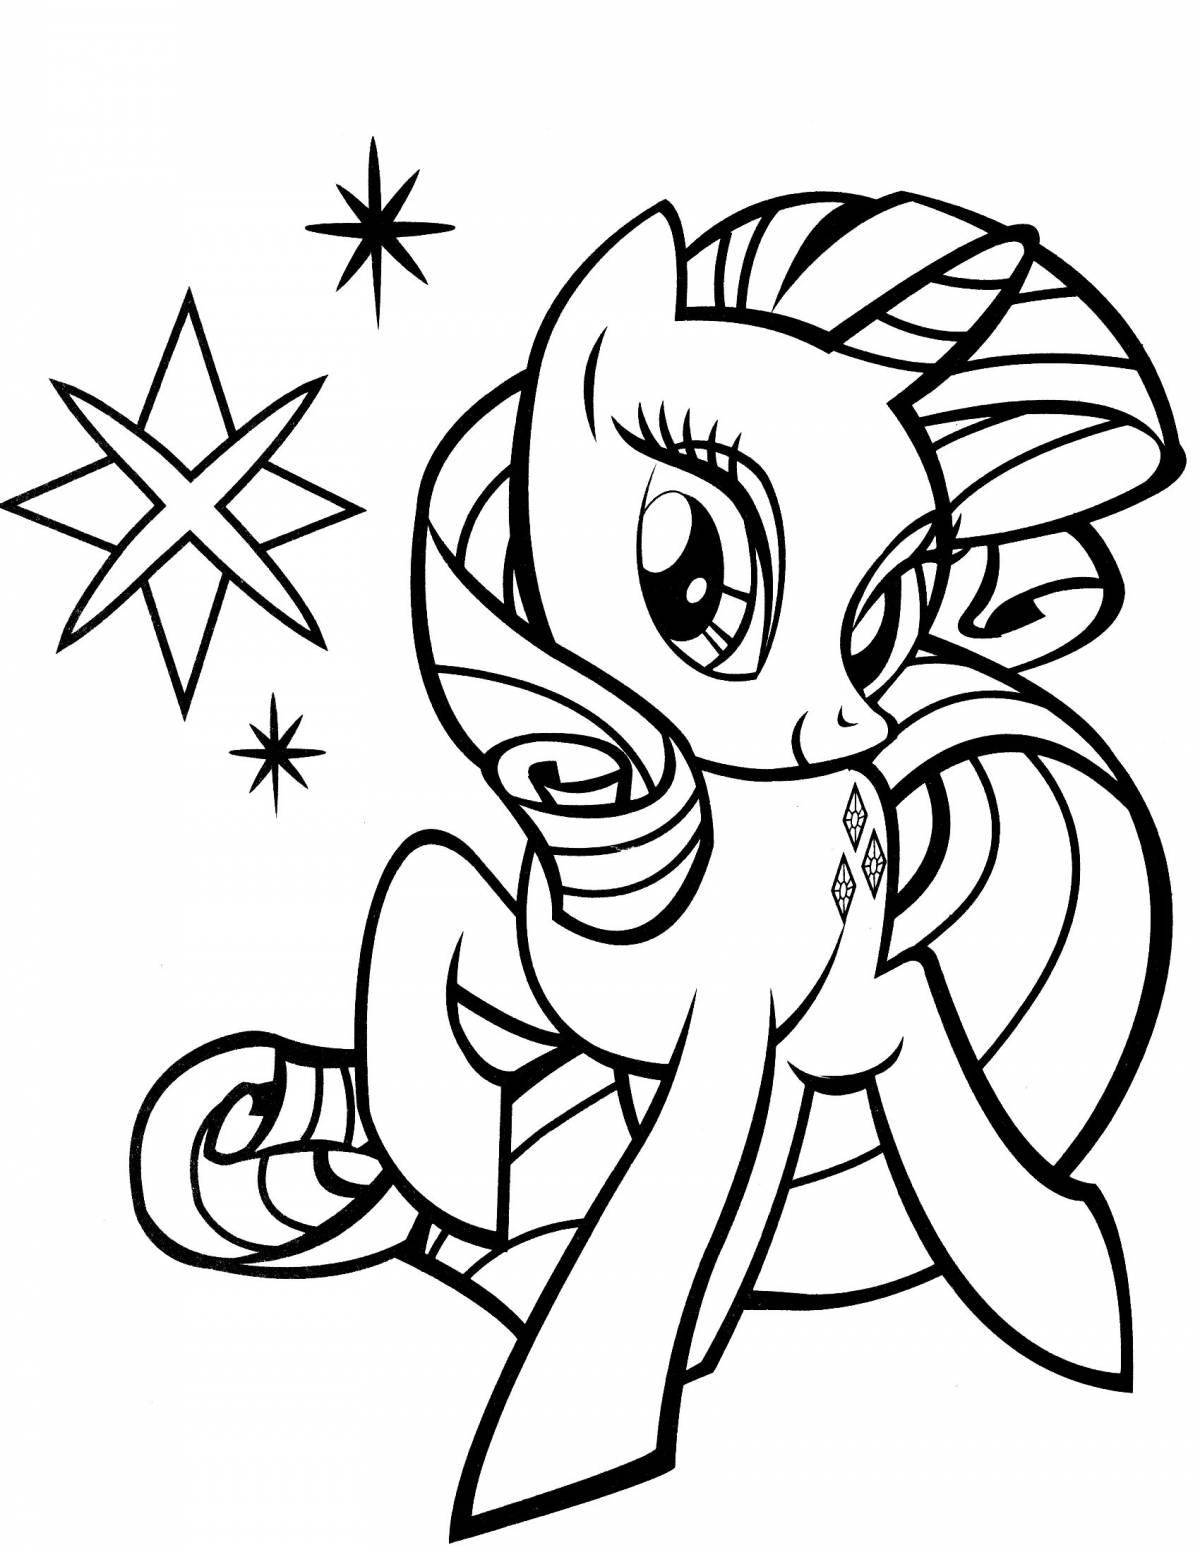 Great pony cuties coloring book for girls